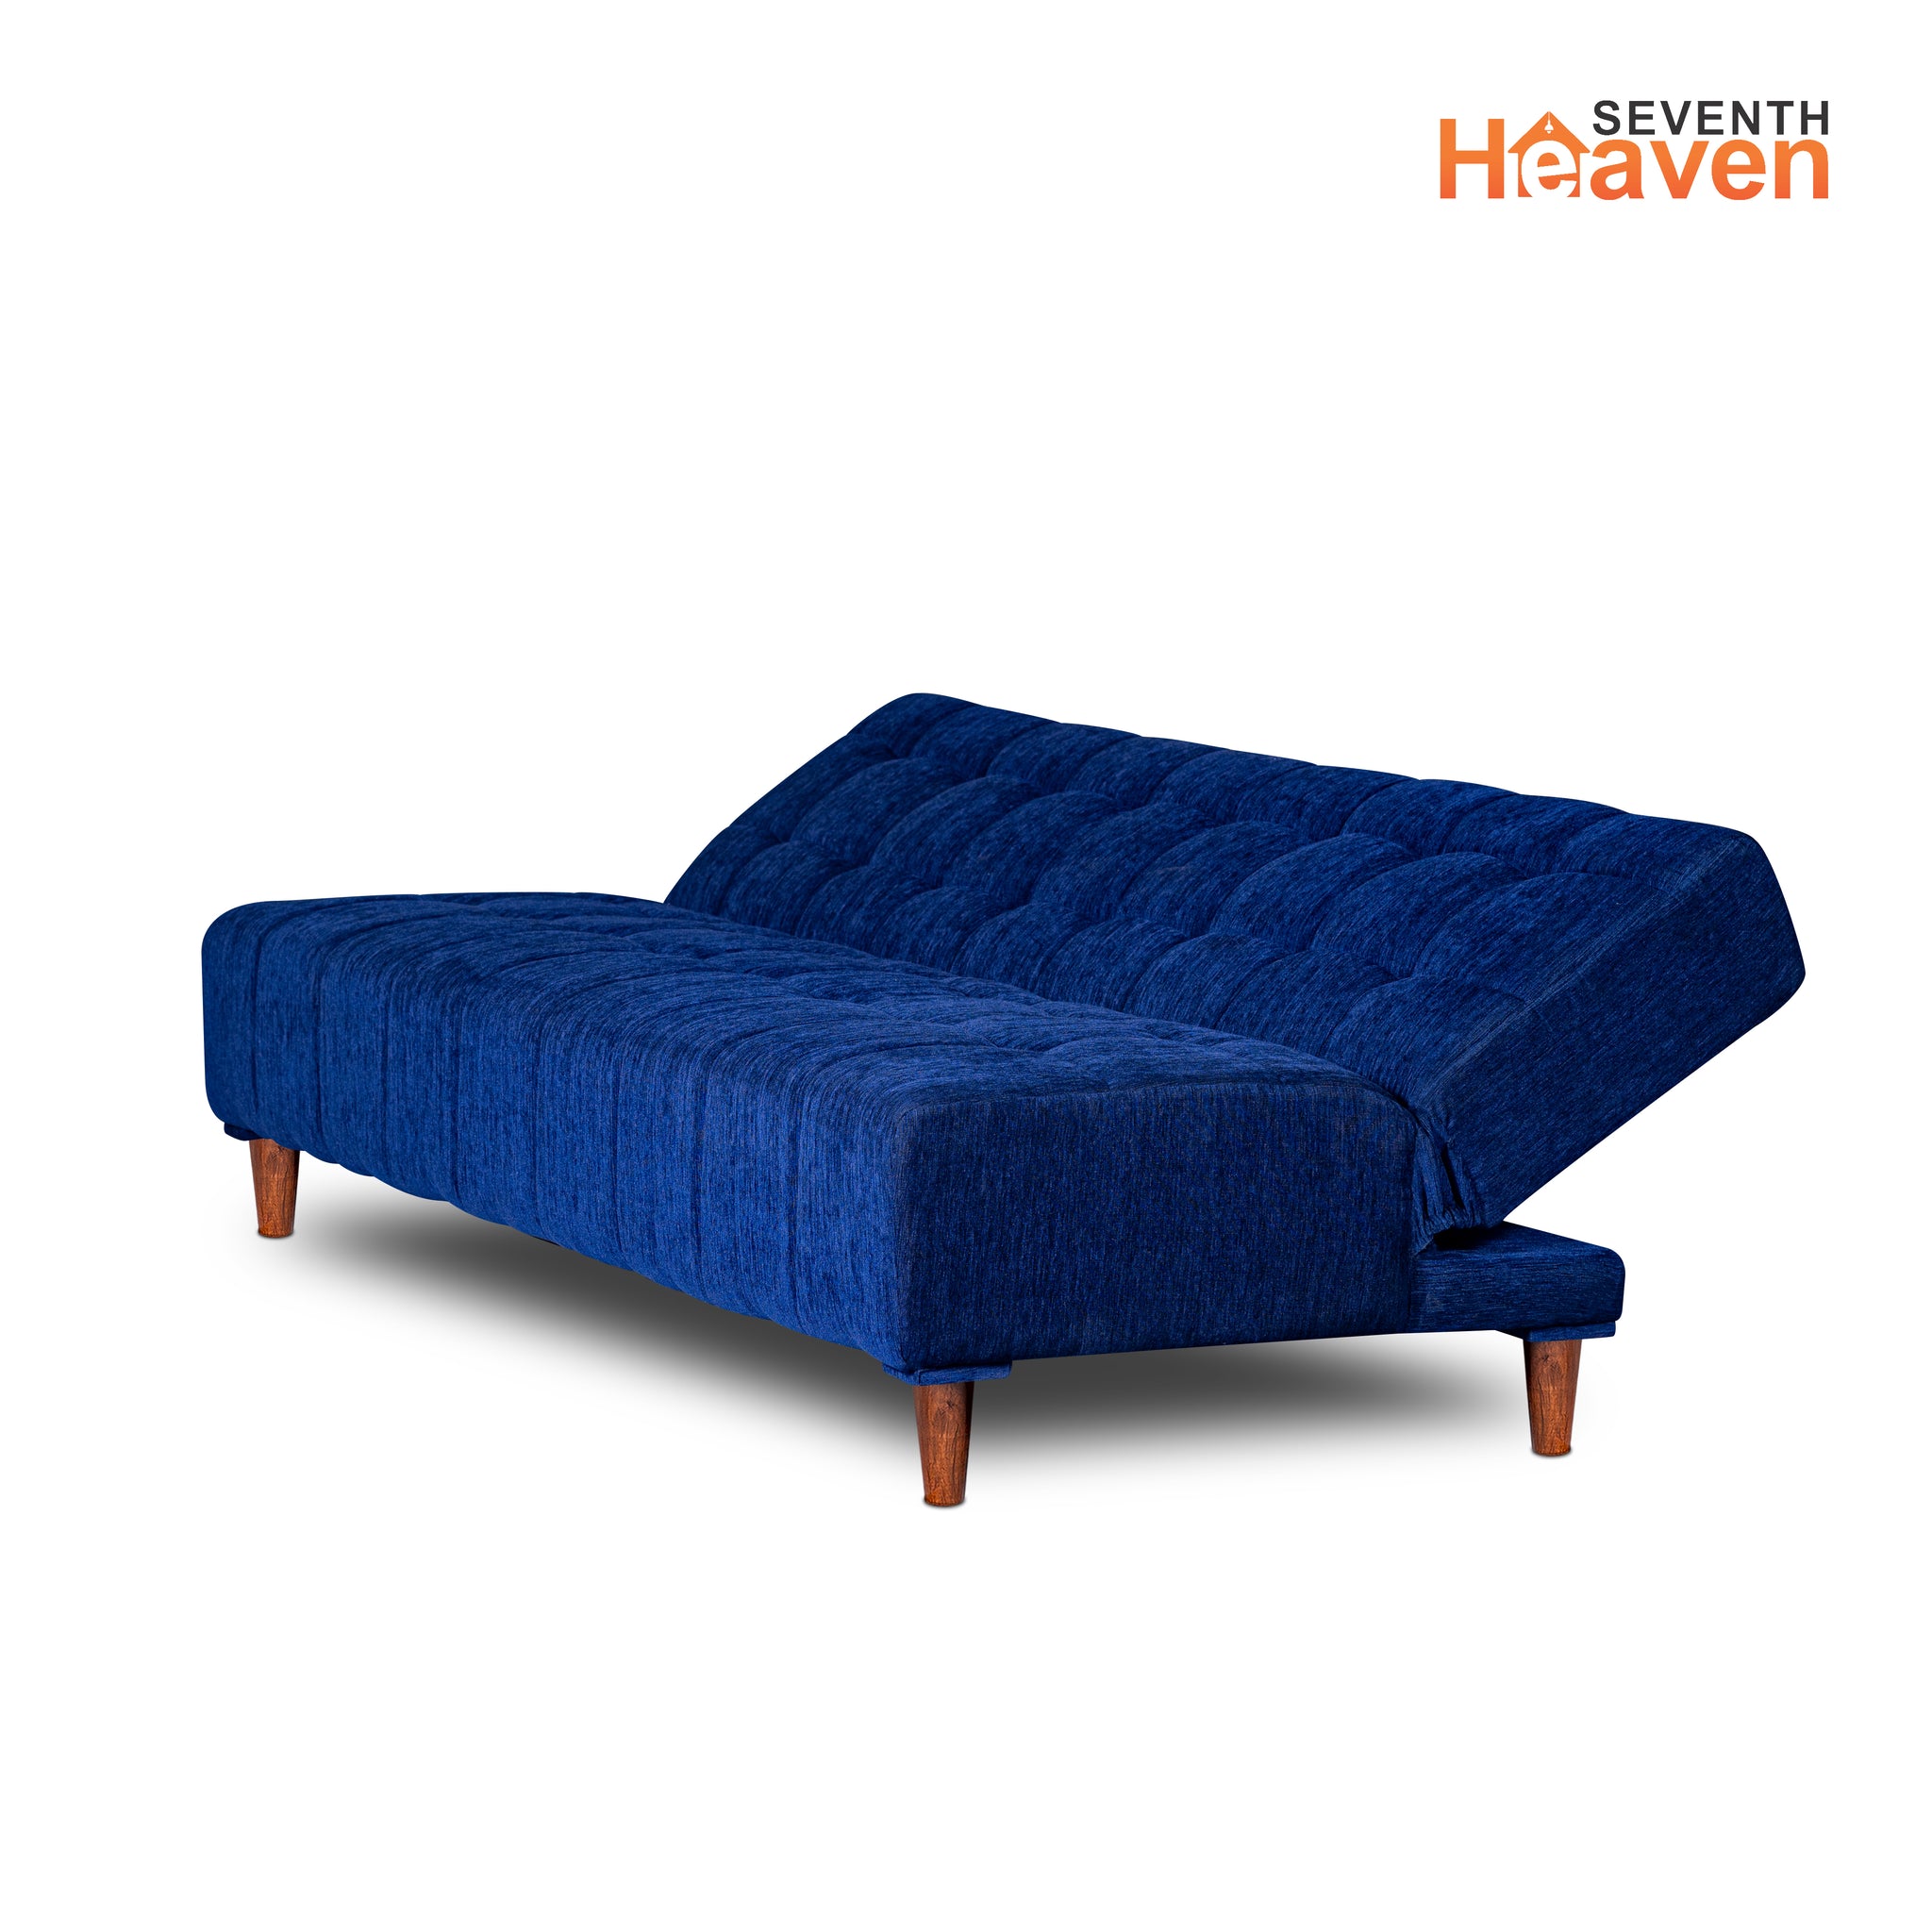 Seventh Heaven Florida 4 Seater Wooden Sofa Cum Bed. Modern & Elegant Smart Furniture Range for luxurious homes, living rooms and offices. Use as a sofa, lounger or bed. Perfect for guests. Molphino fabric with sheesham polished wooden legs. Blue colour.